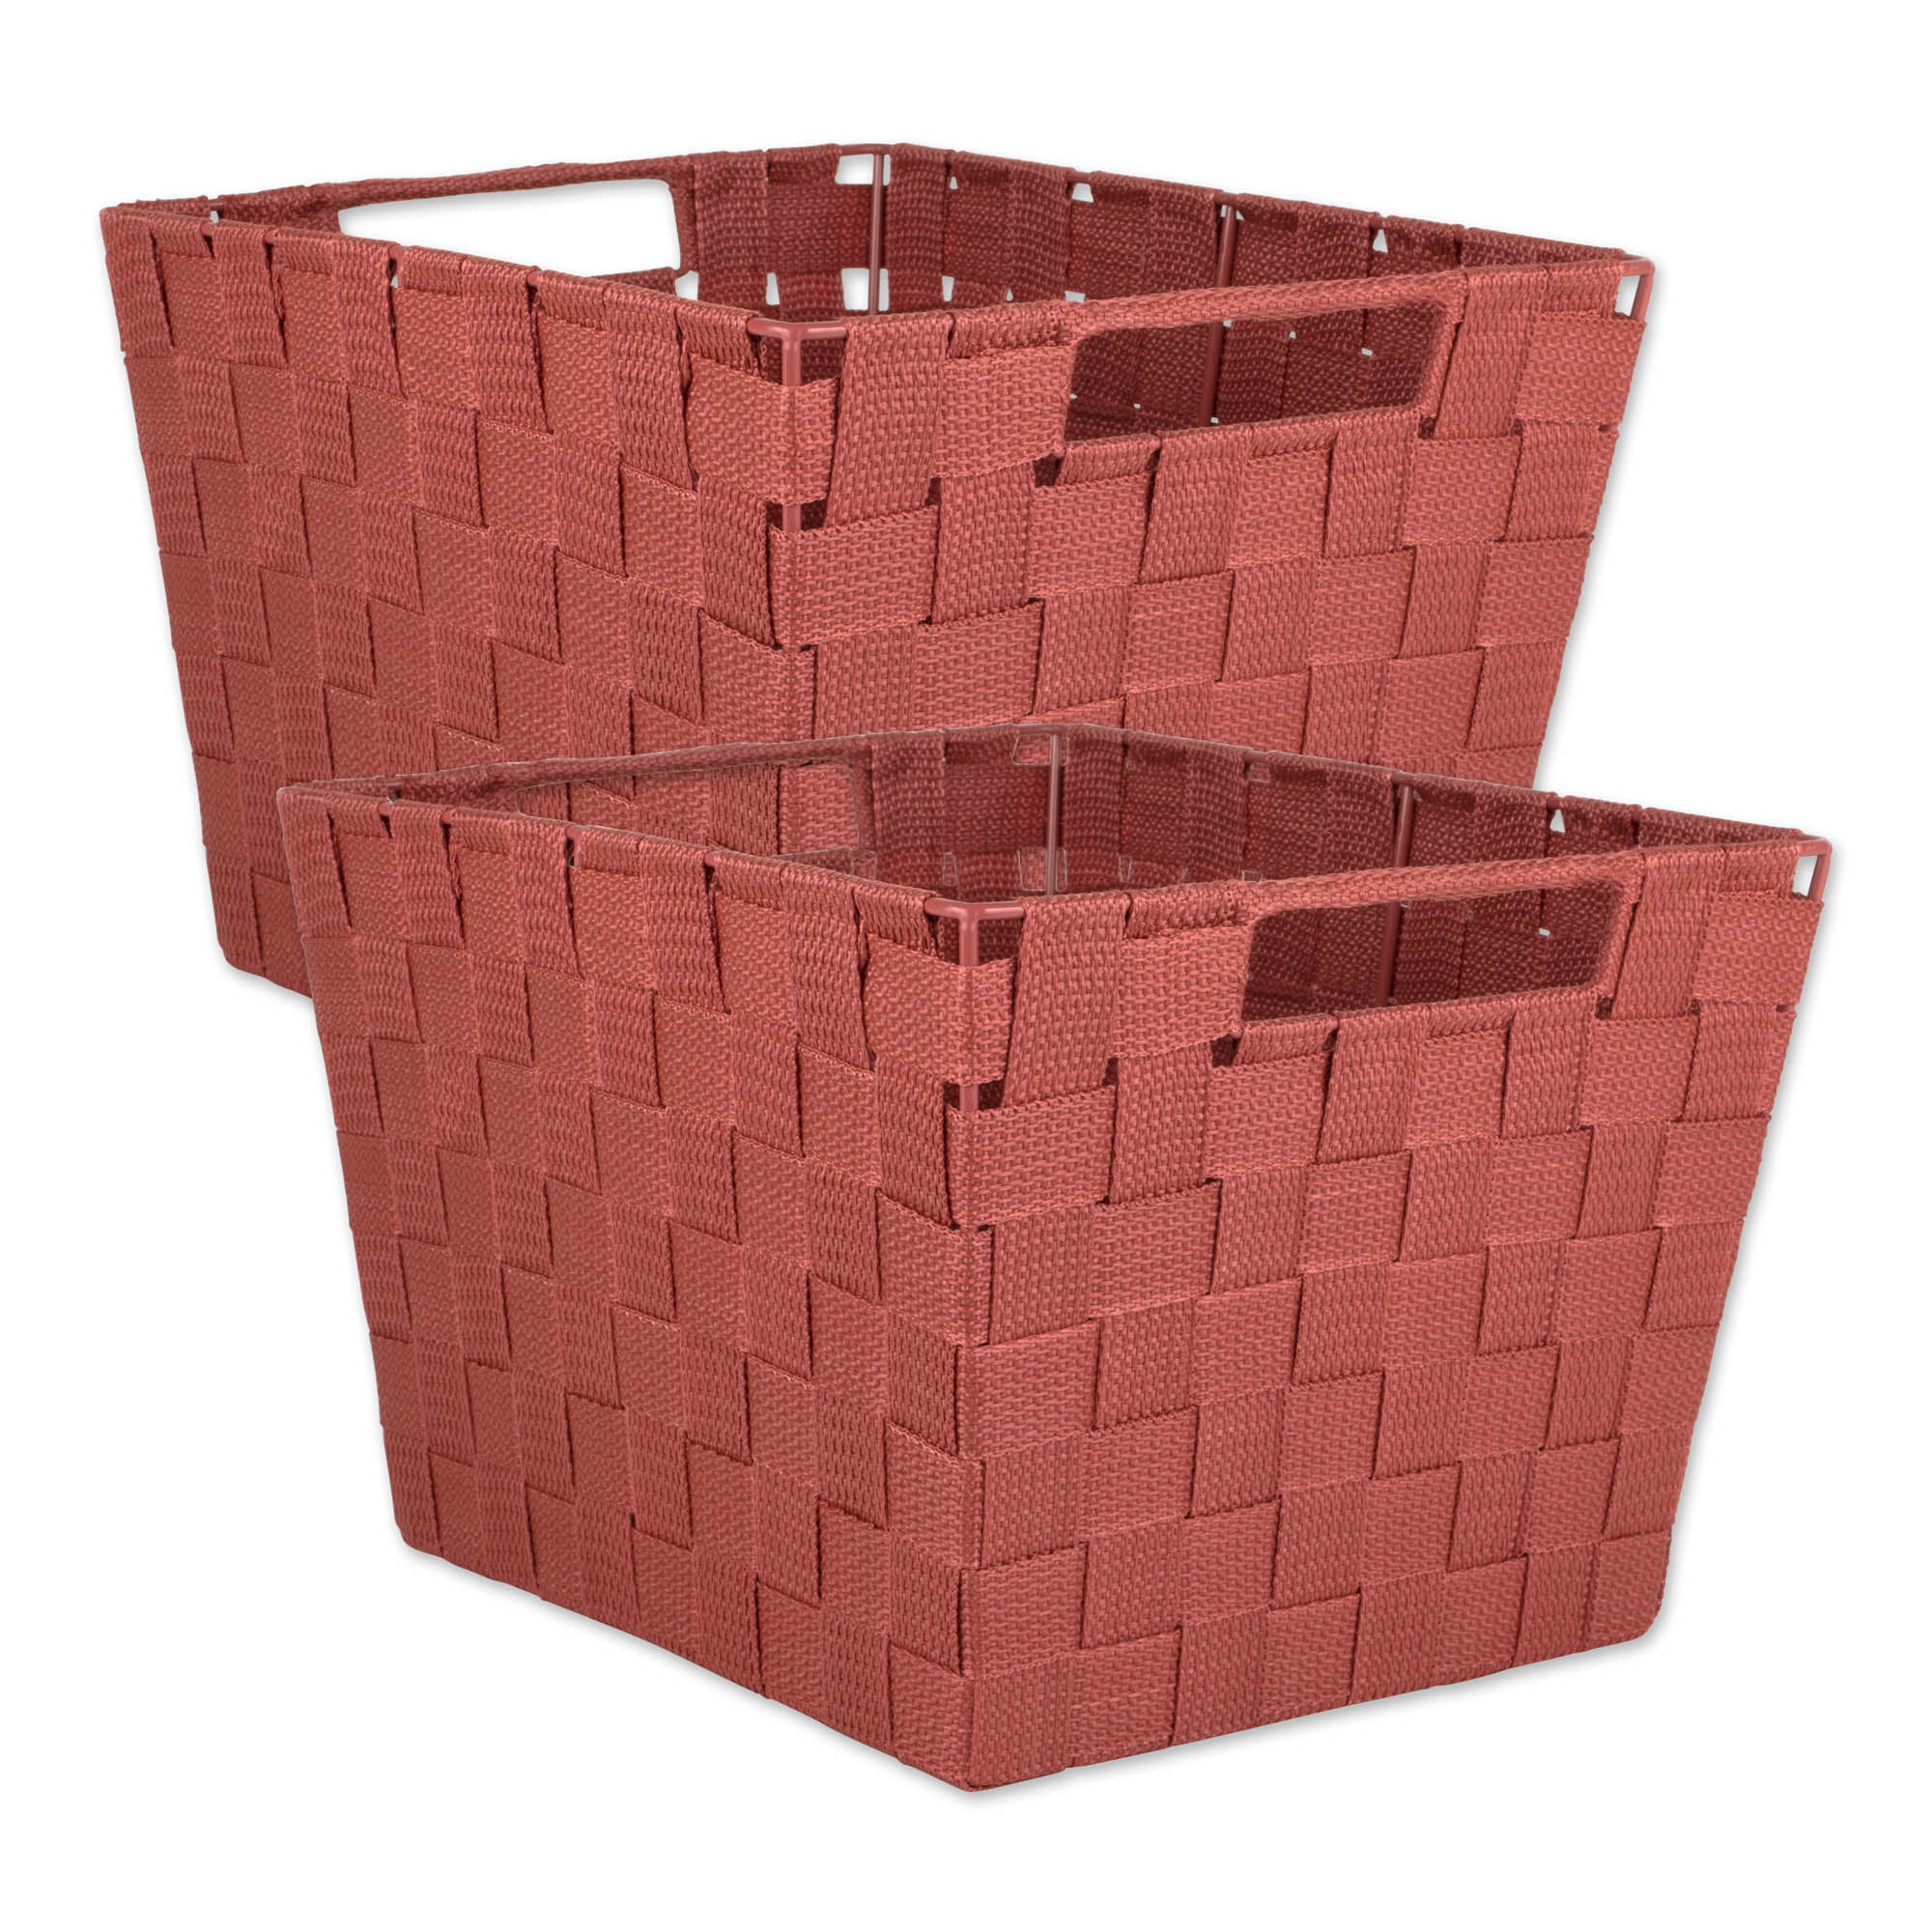 Details about   Decorative Basket Fabric Storage Bin Home Organizer with Rope Handles Toy Box 